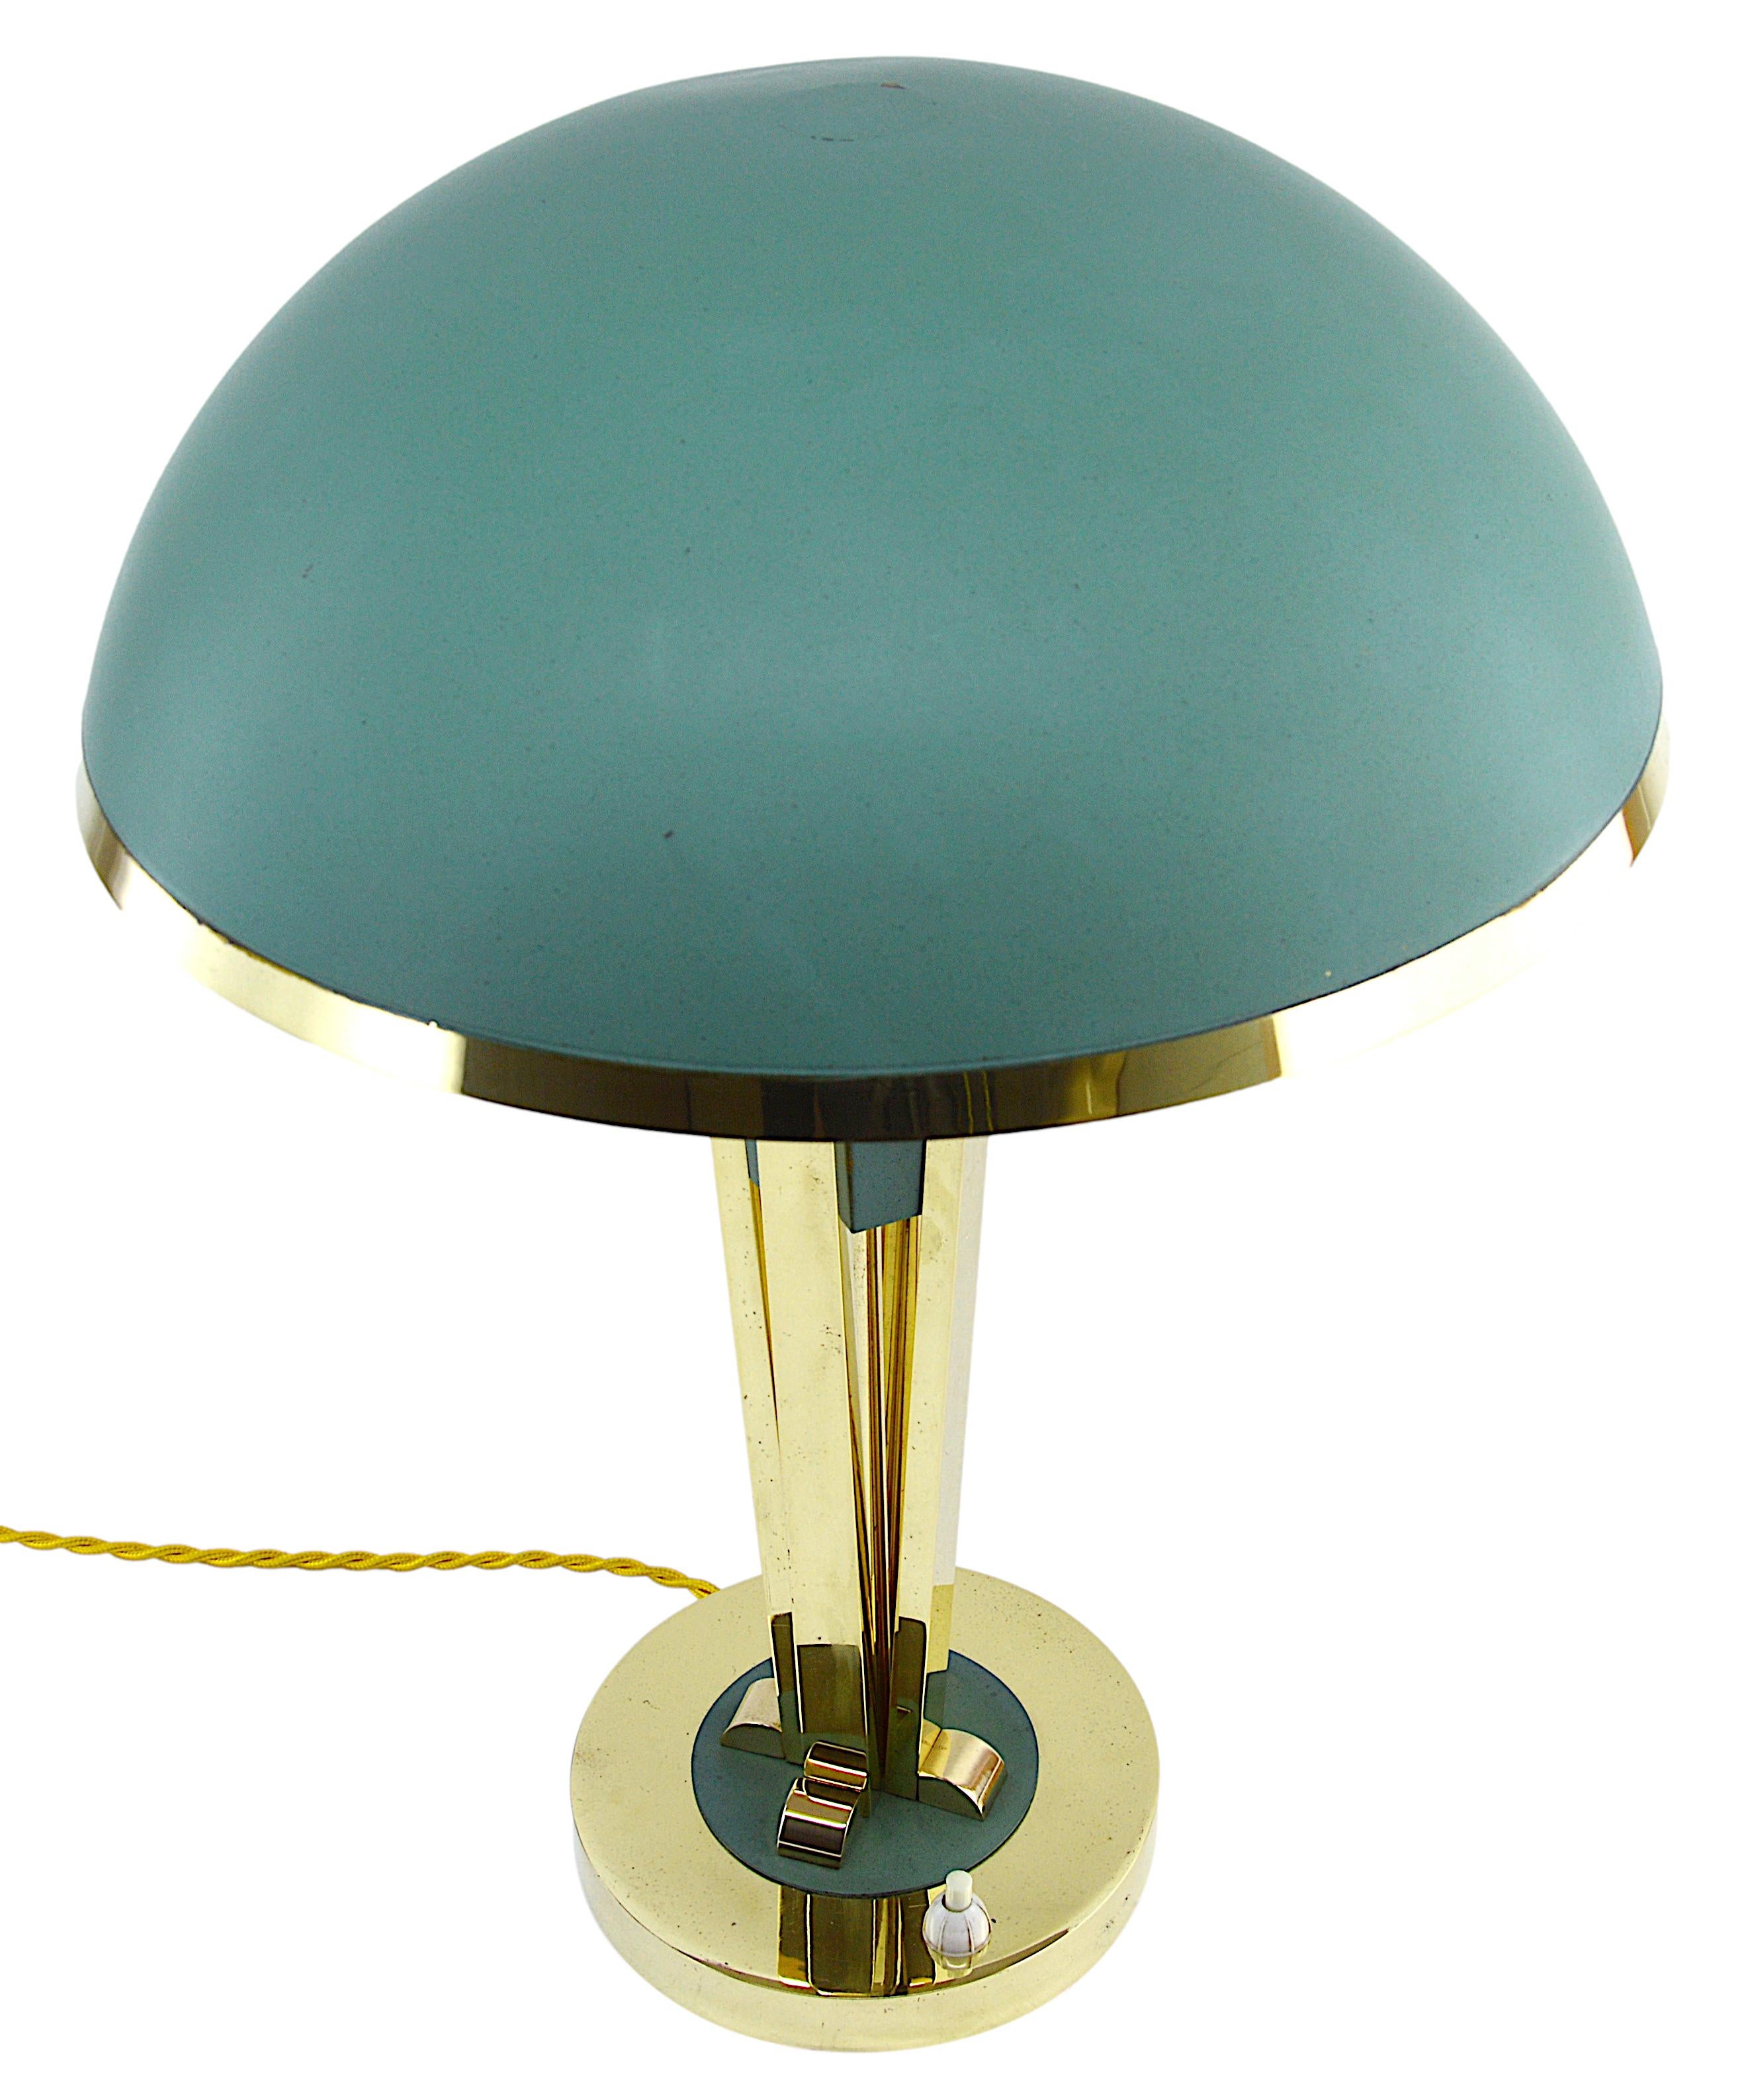 Brass French Art Deco Desk or Table Lamp, circa 1940 For Sale